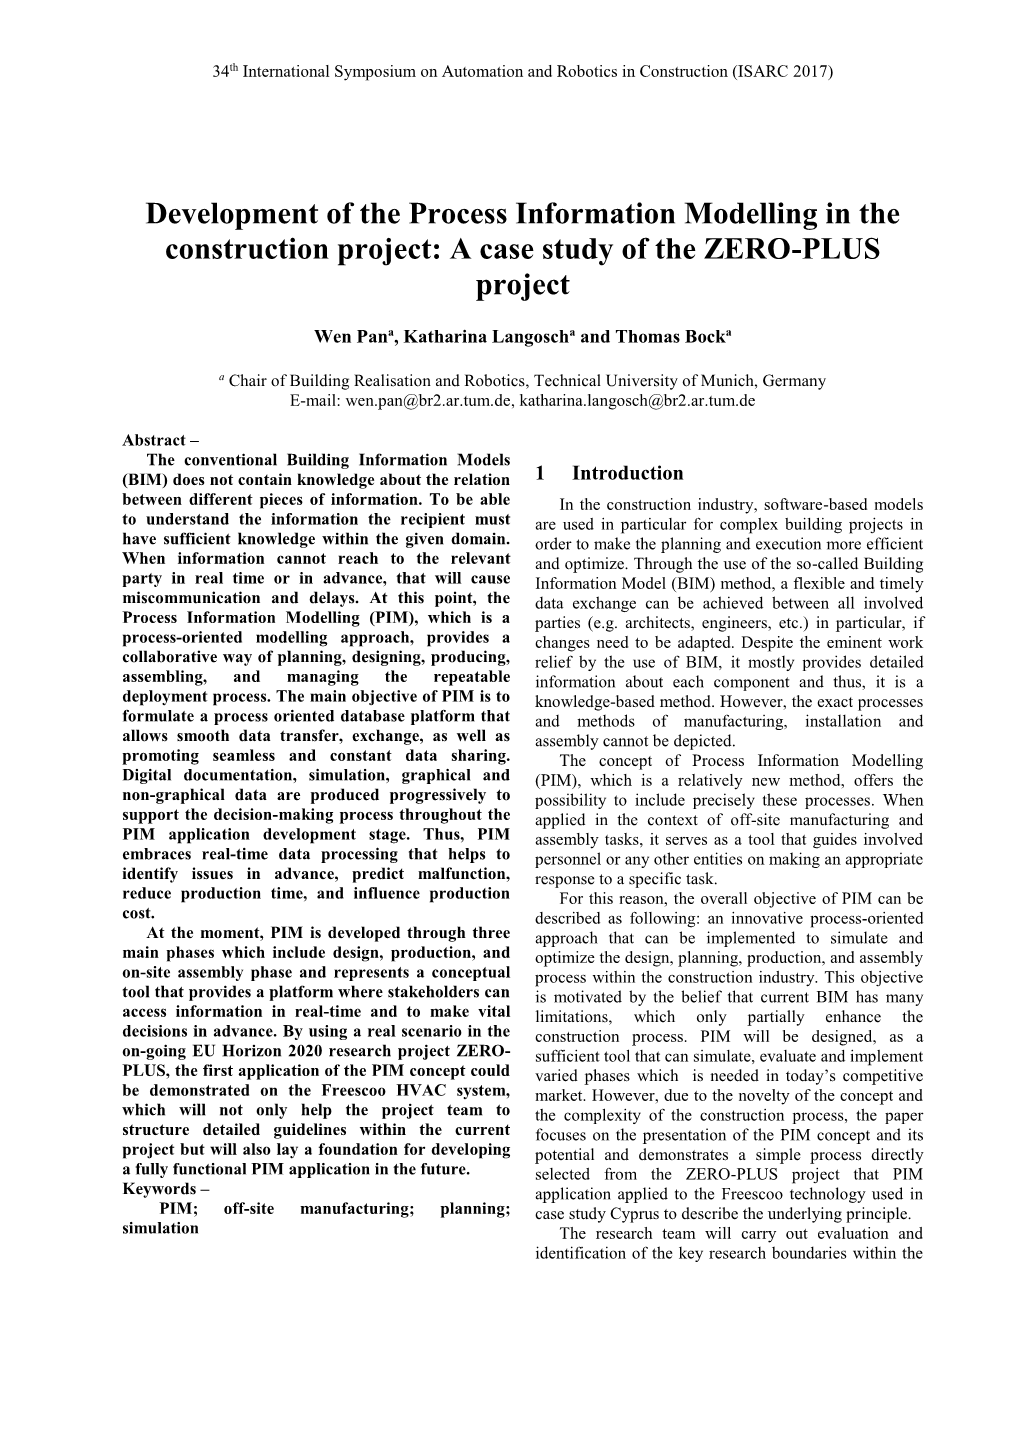 Development of the Process Information Modelling in the Construction Project: a Case Study of the ZERO-PLUS Project